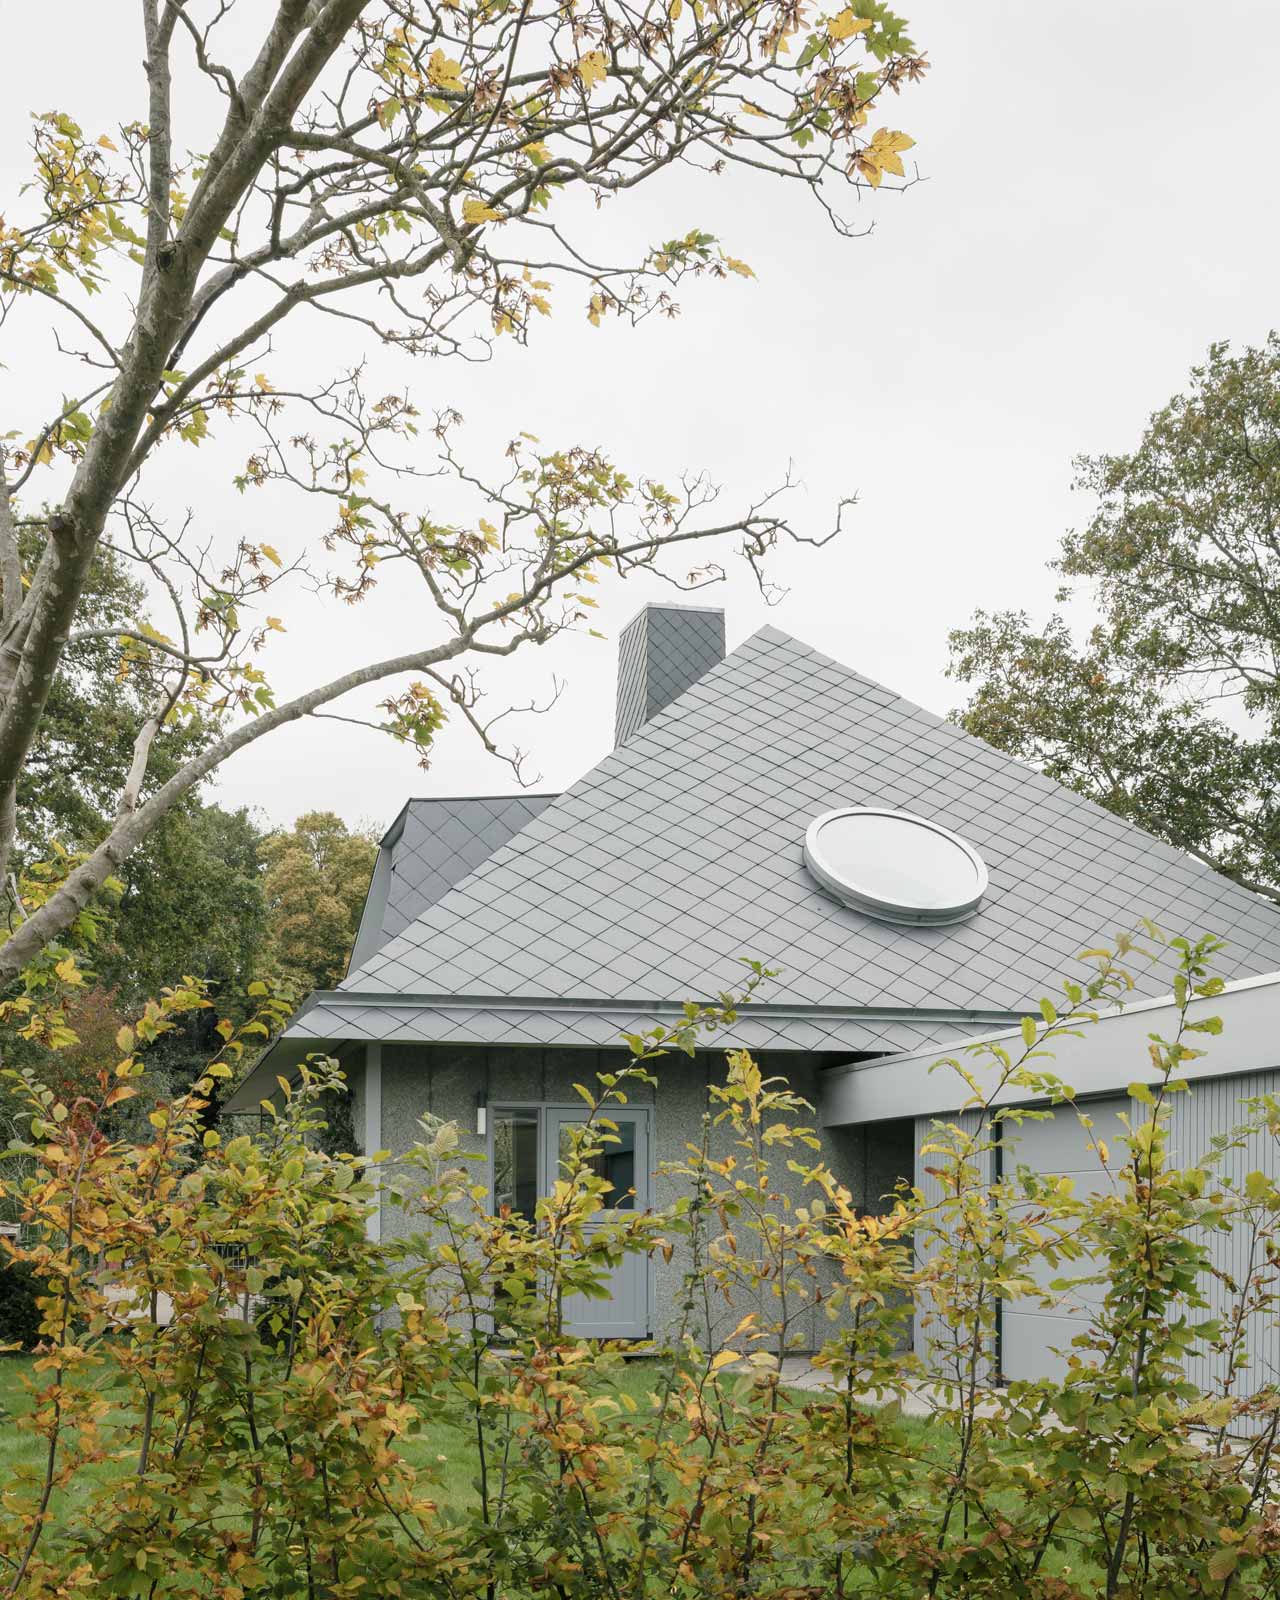 exterior photo of house tc with circular roof light by beta architect amsterdam evert klinkenberg gus auguste van oppen image by Stijn Bollaert